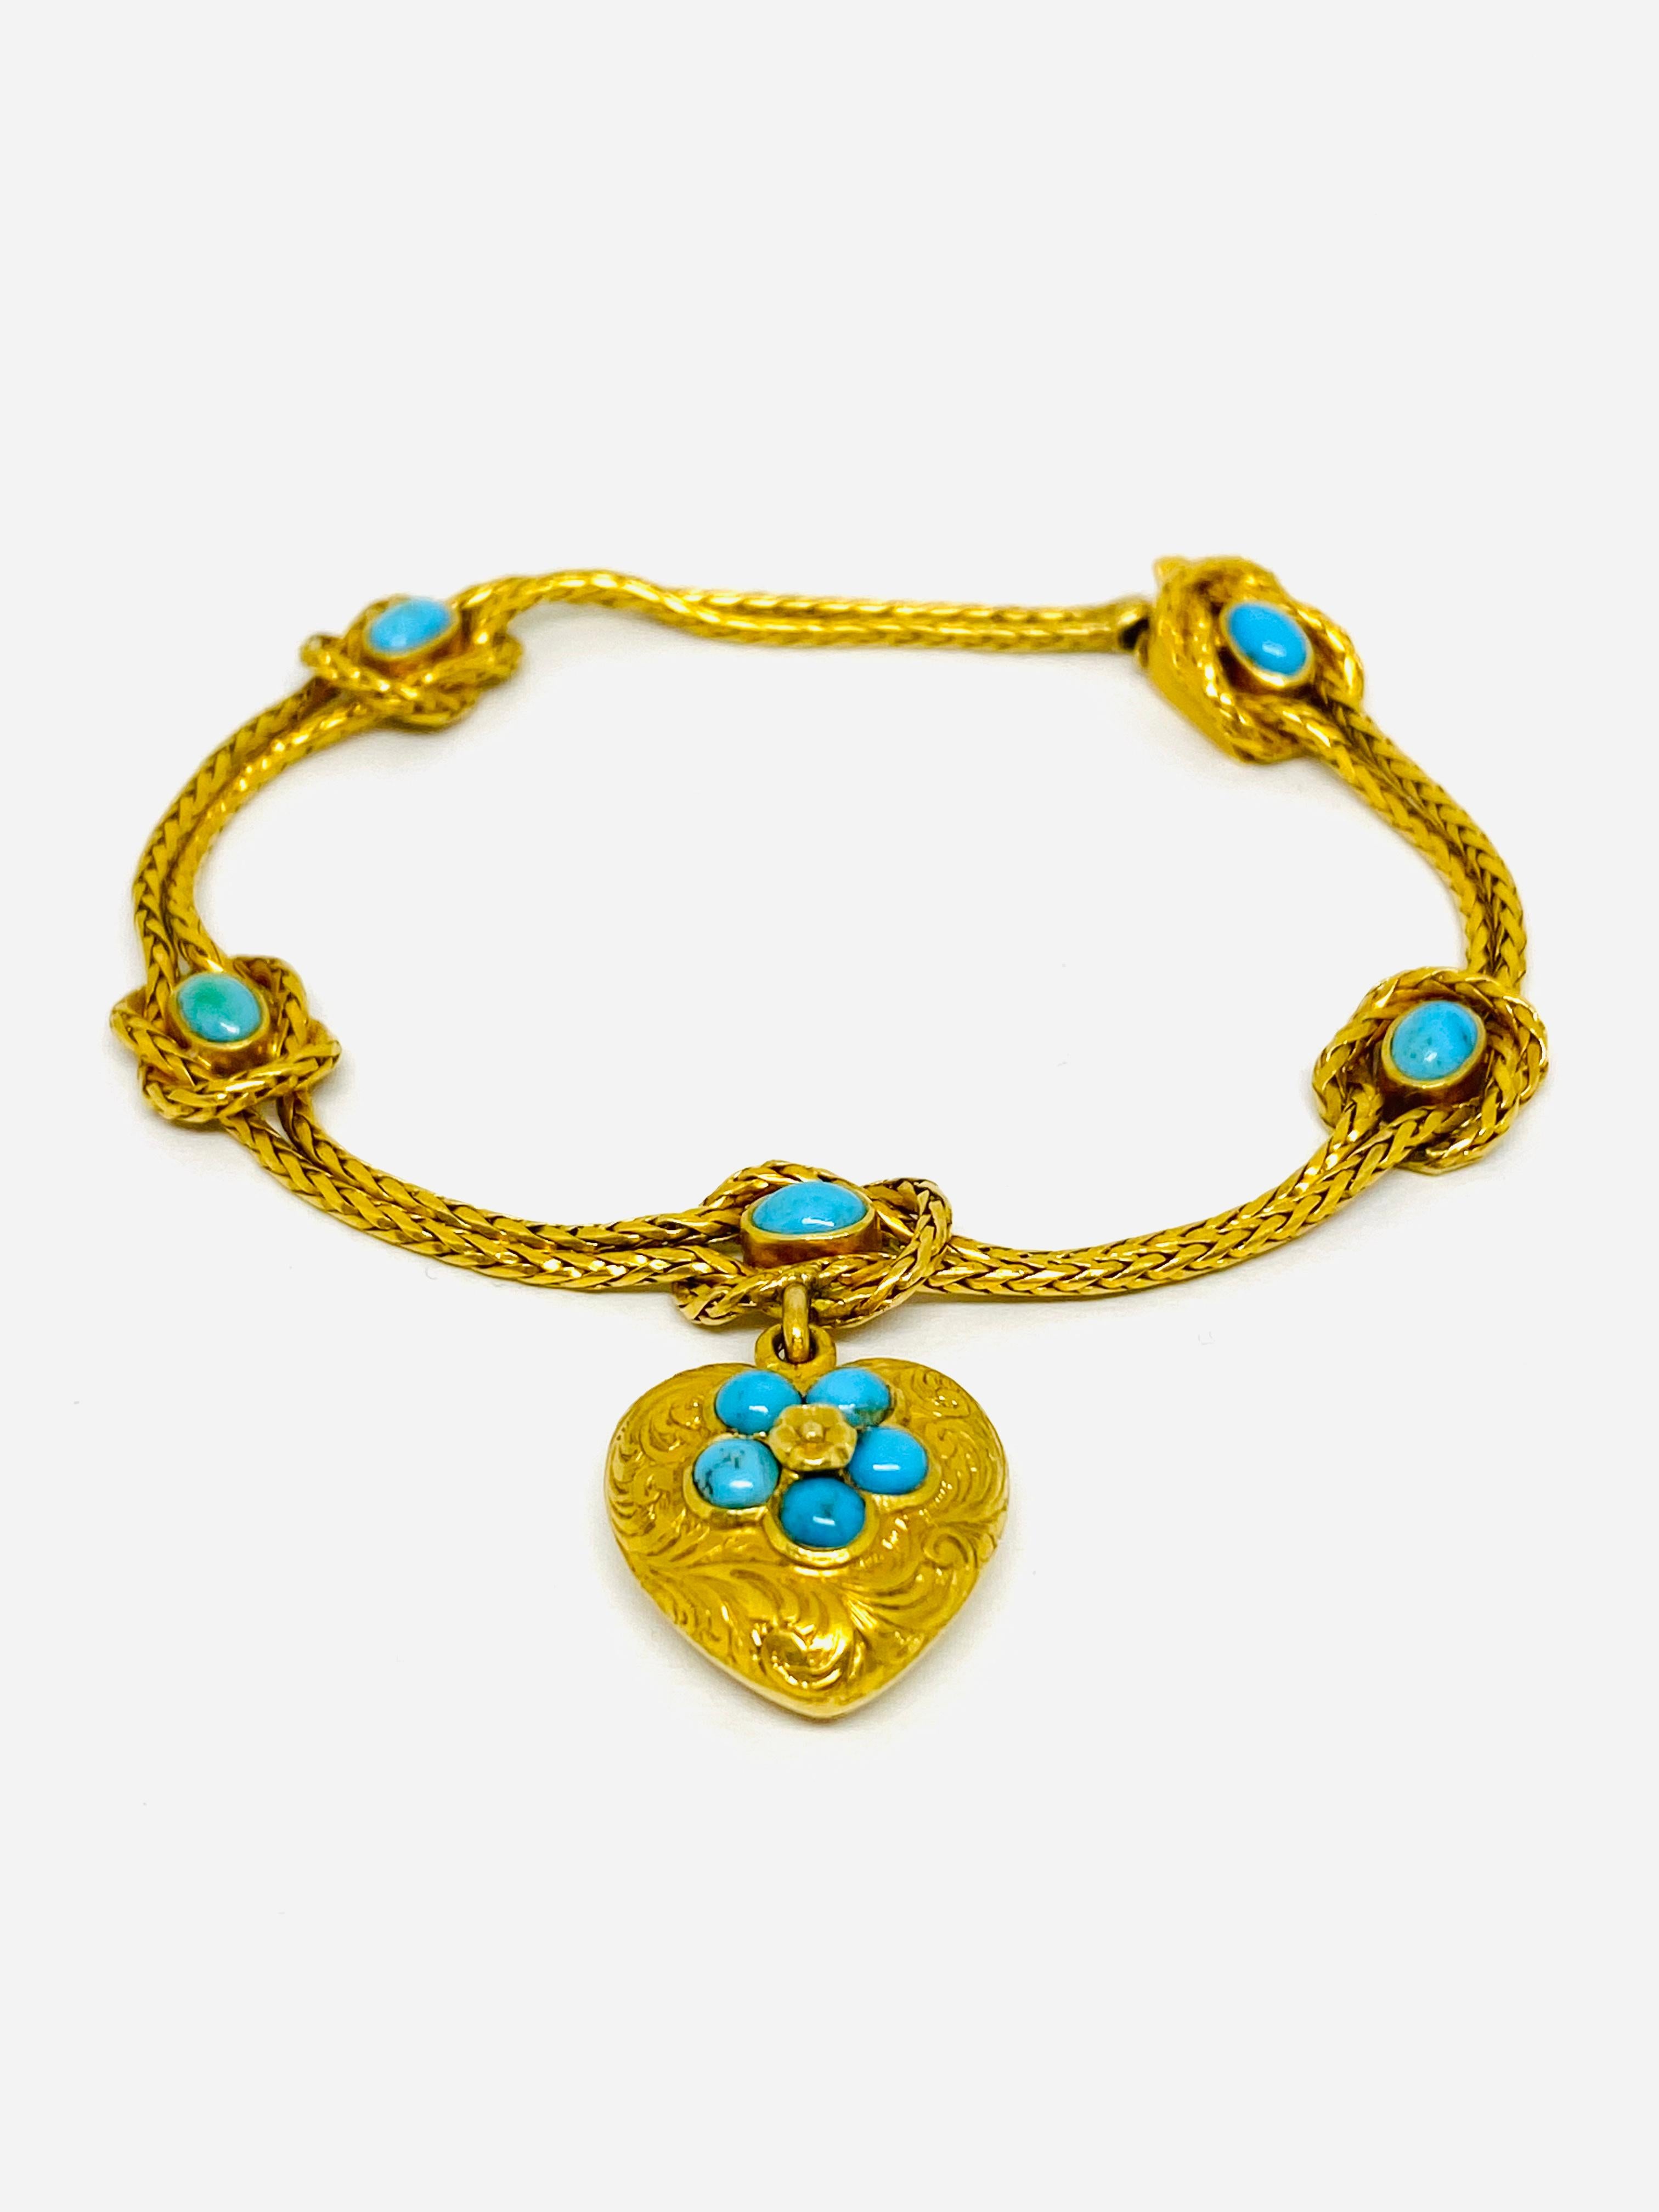 Product details:
Circa 1900's
18K Yellow Gold and Turquoise
Featuring double braided chain with leaf and flower motif heart charm/ pendant 
Total weight is 18.0 grams